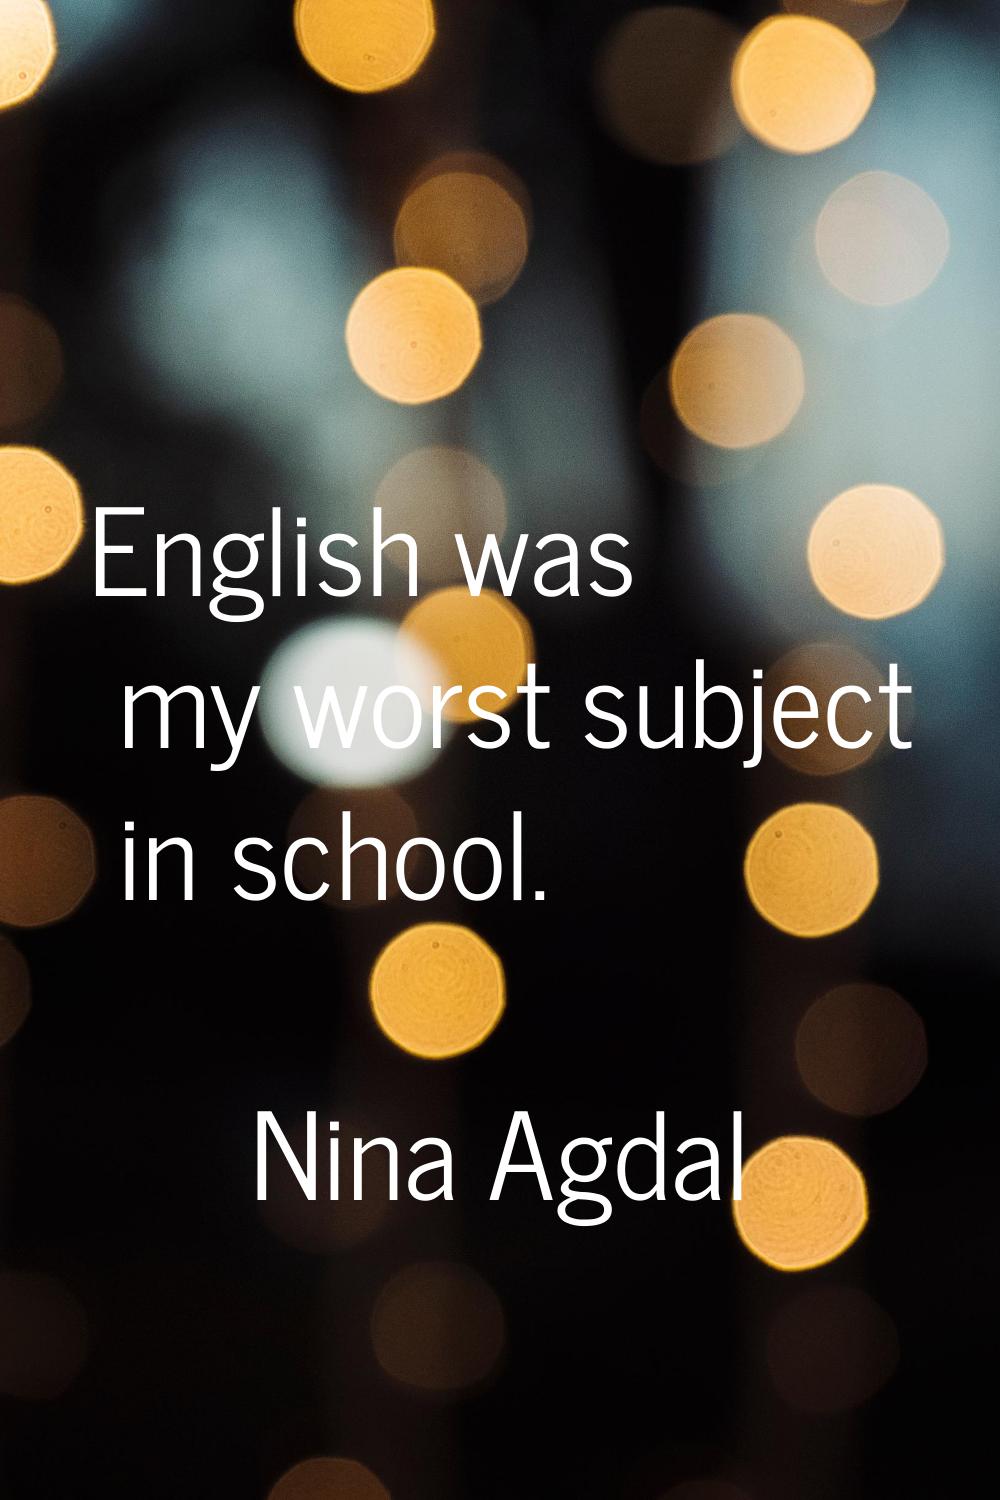 English was my worst subject in school.